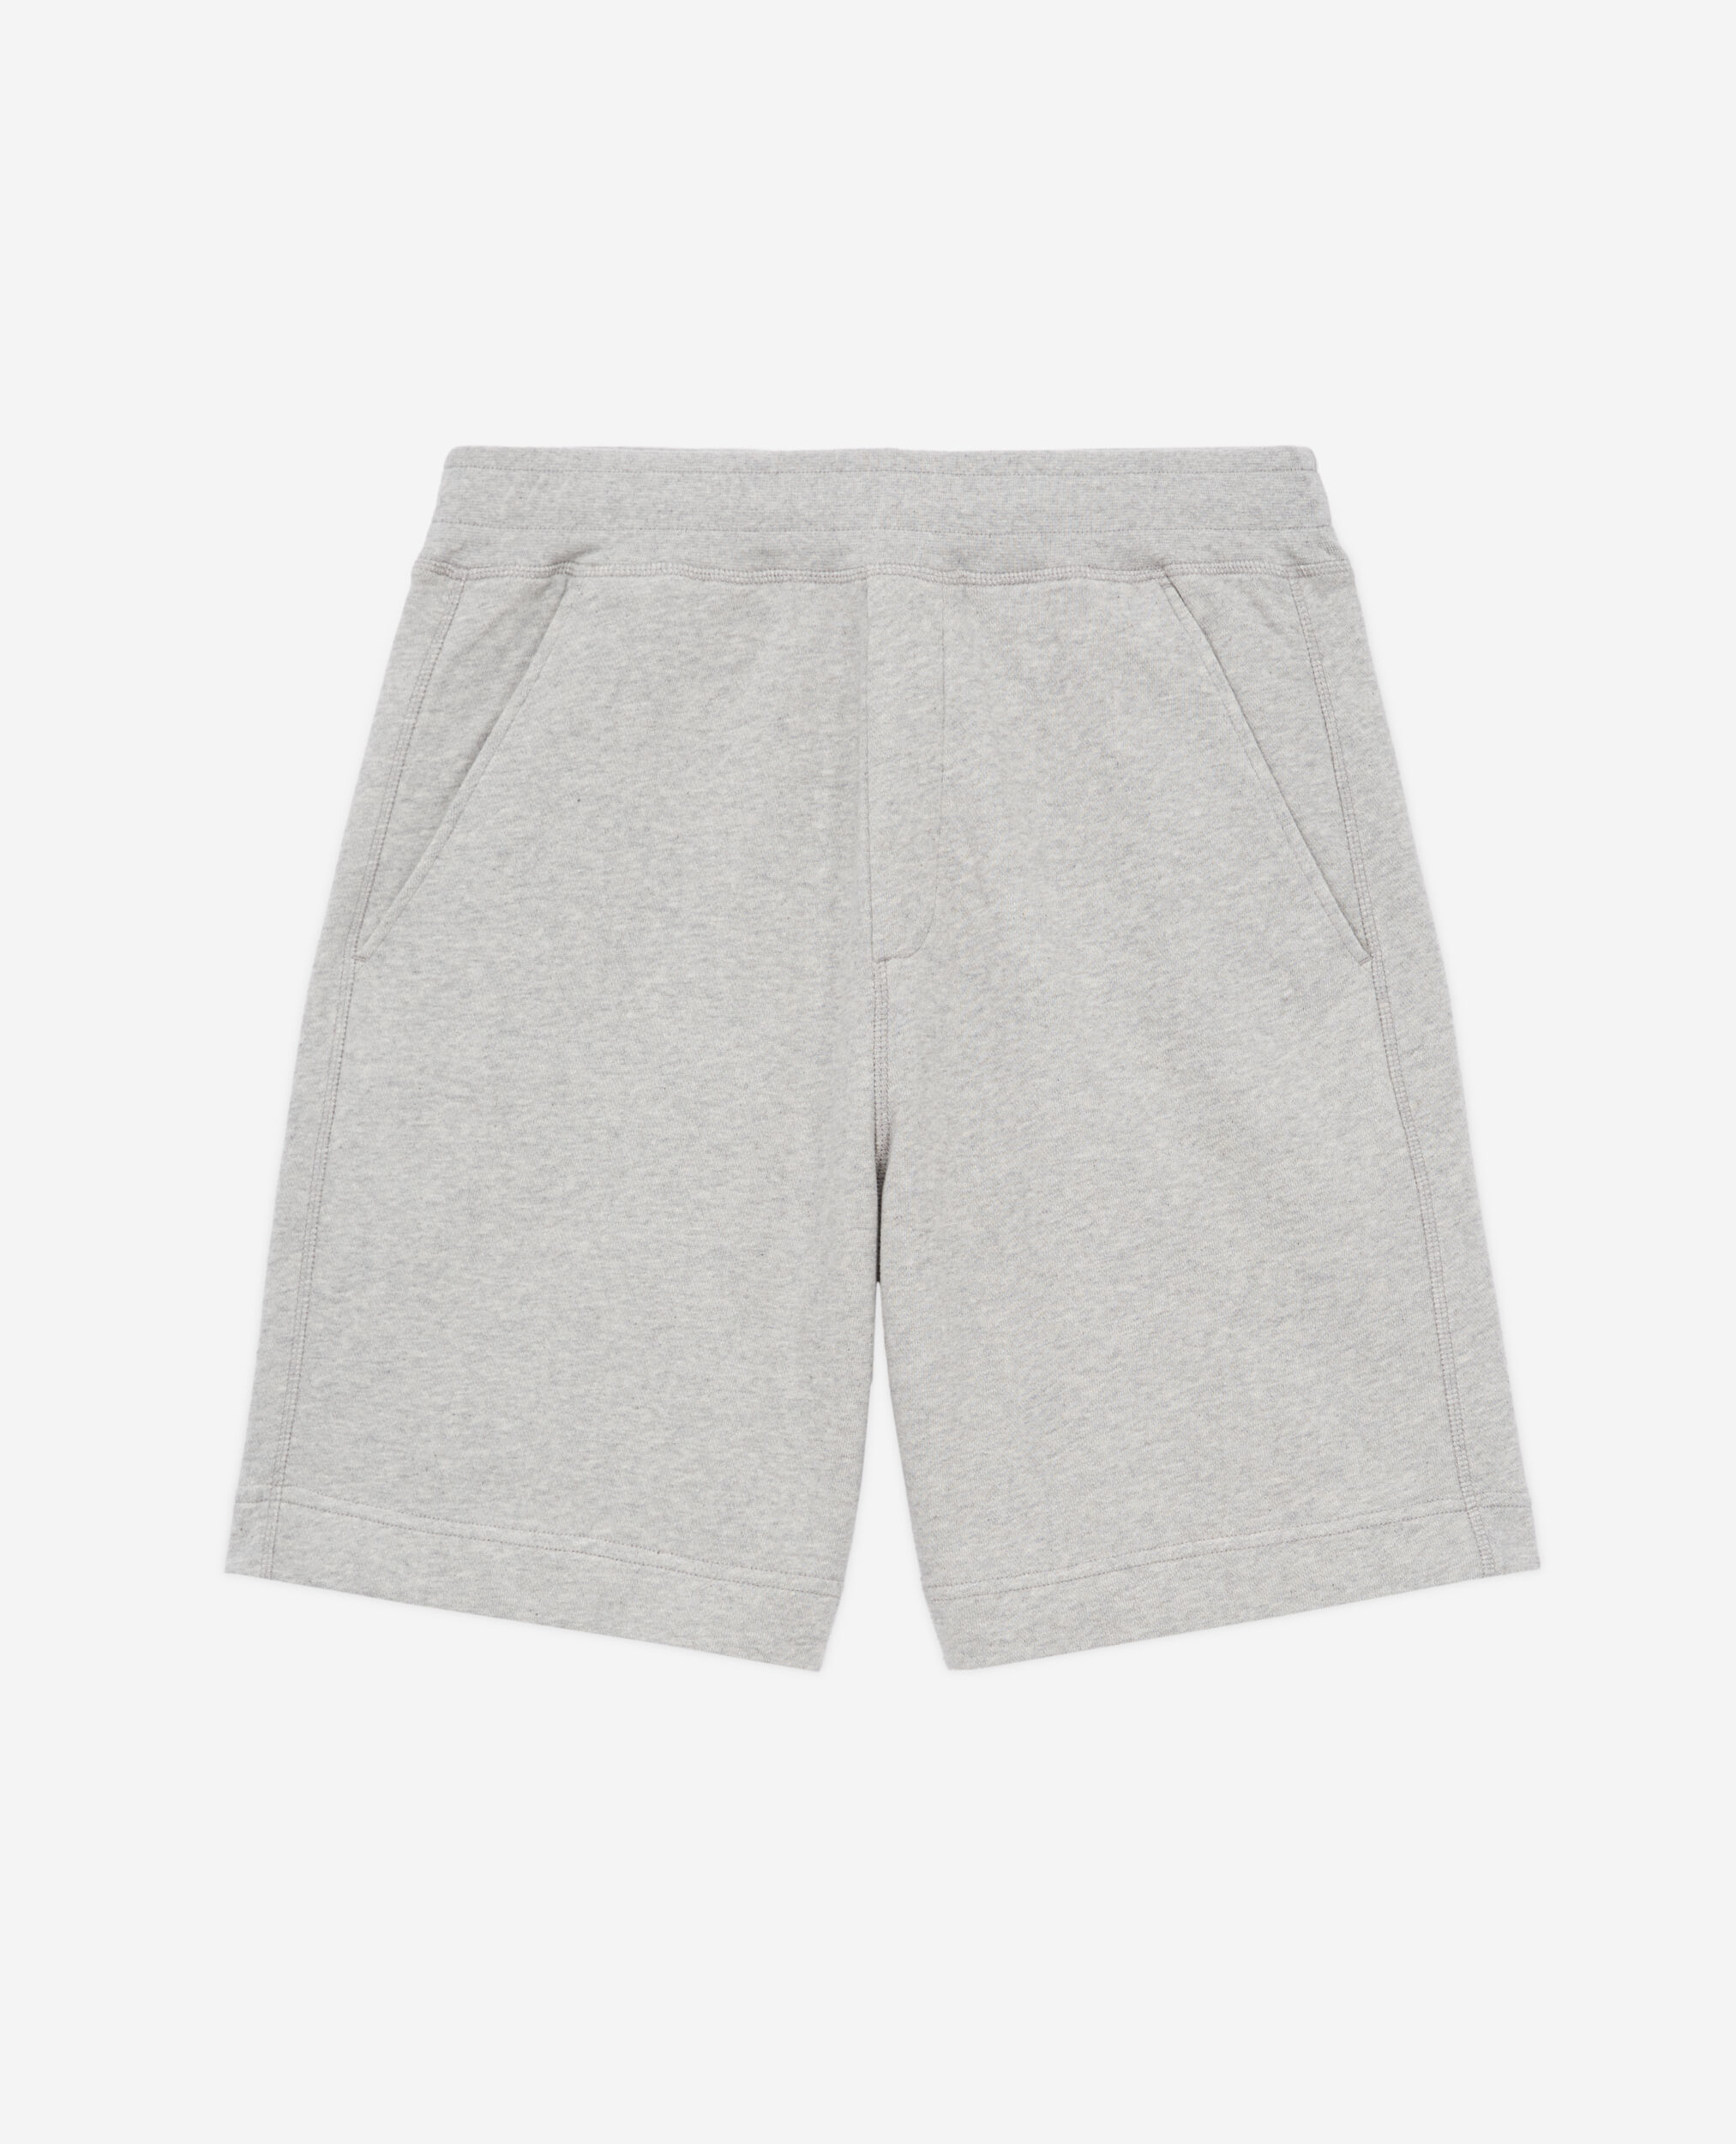 Light gray fleece shorts, GRIS CLAIR, hi-res image number null